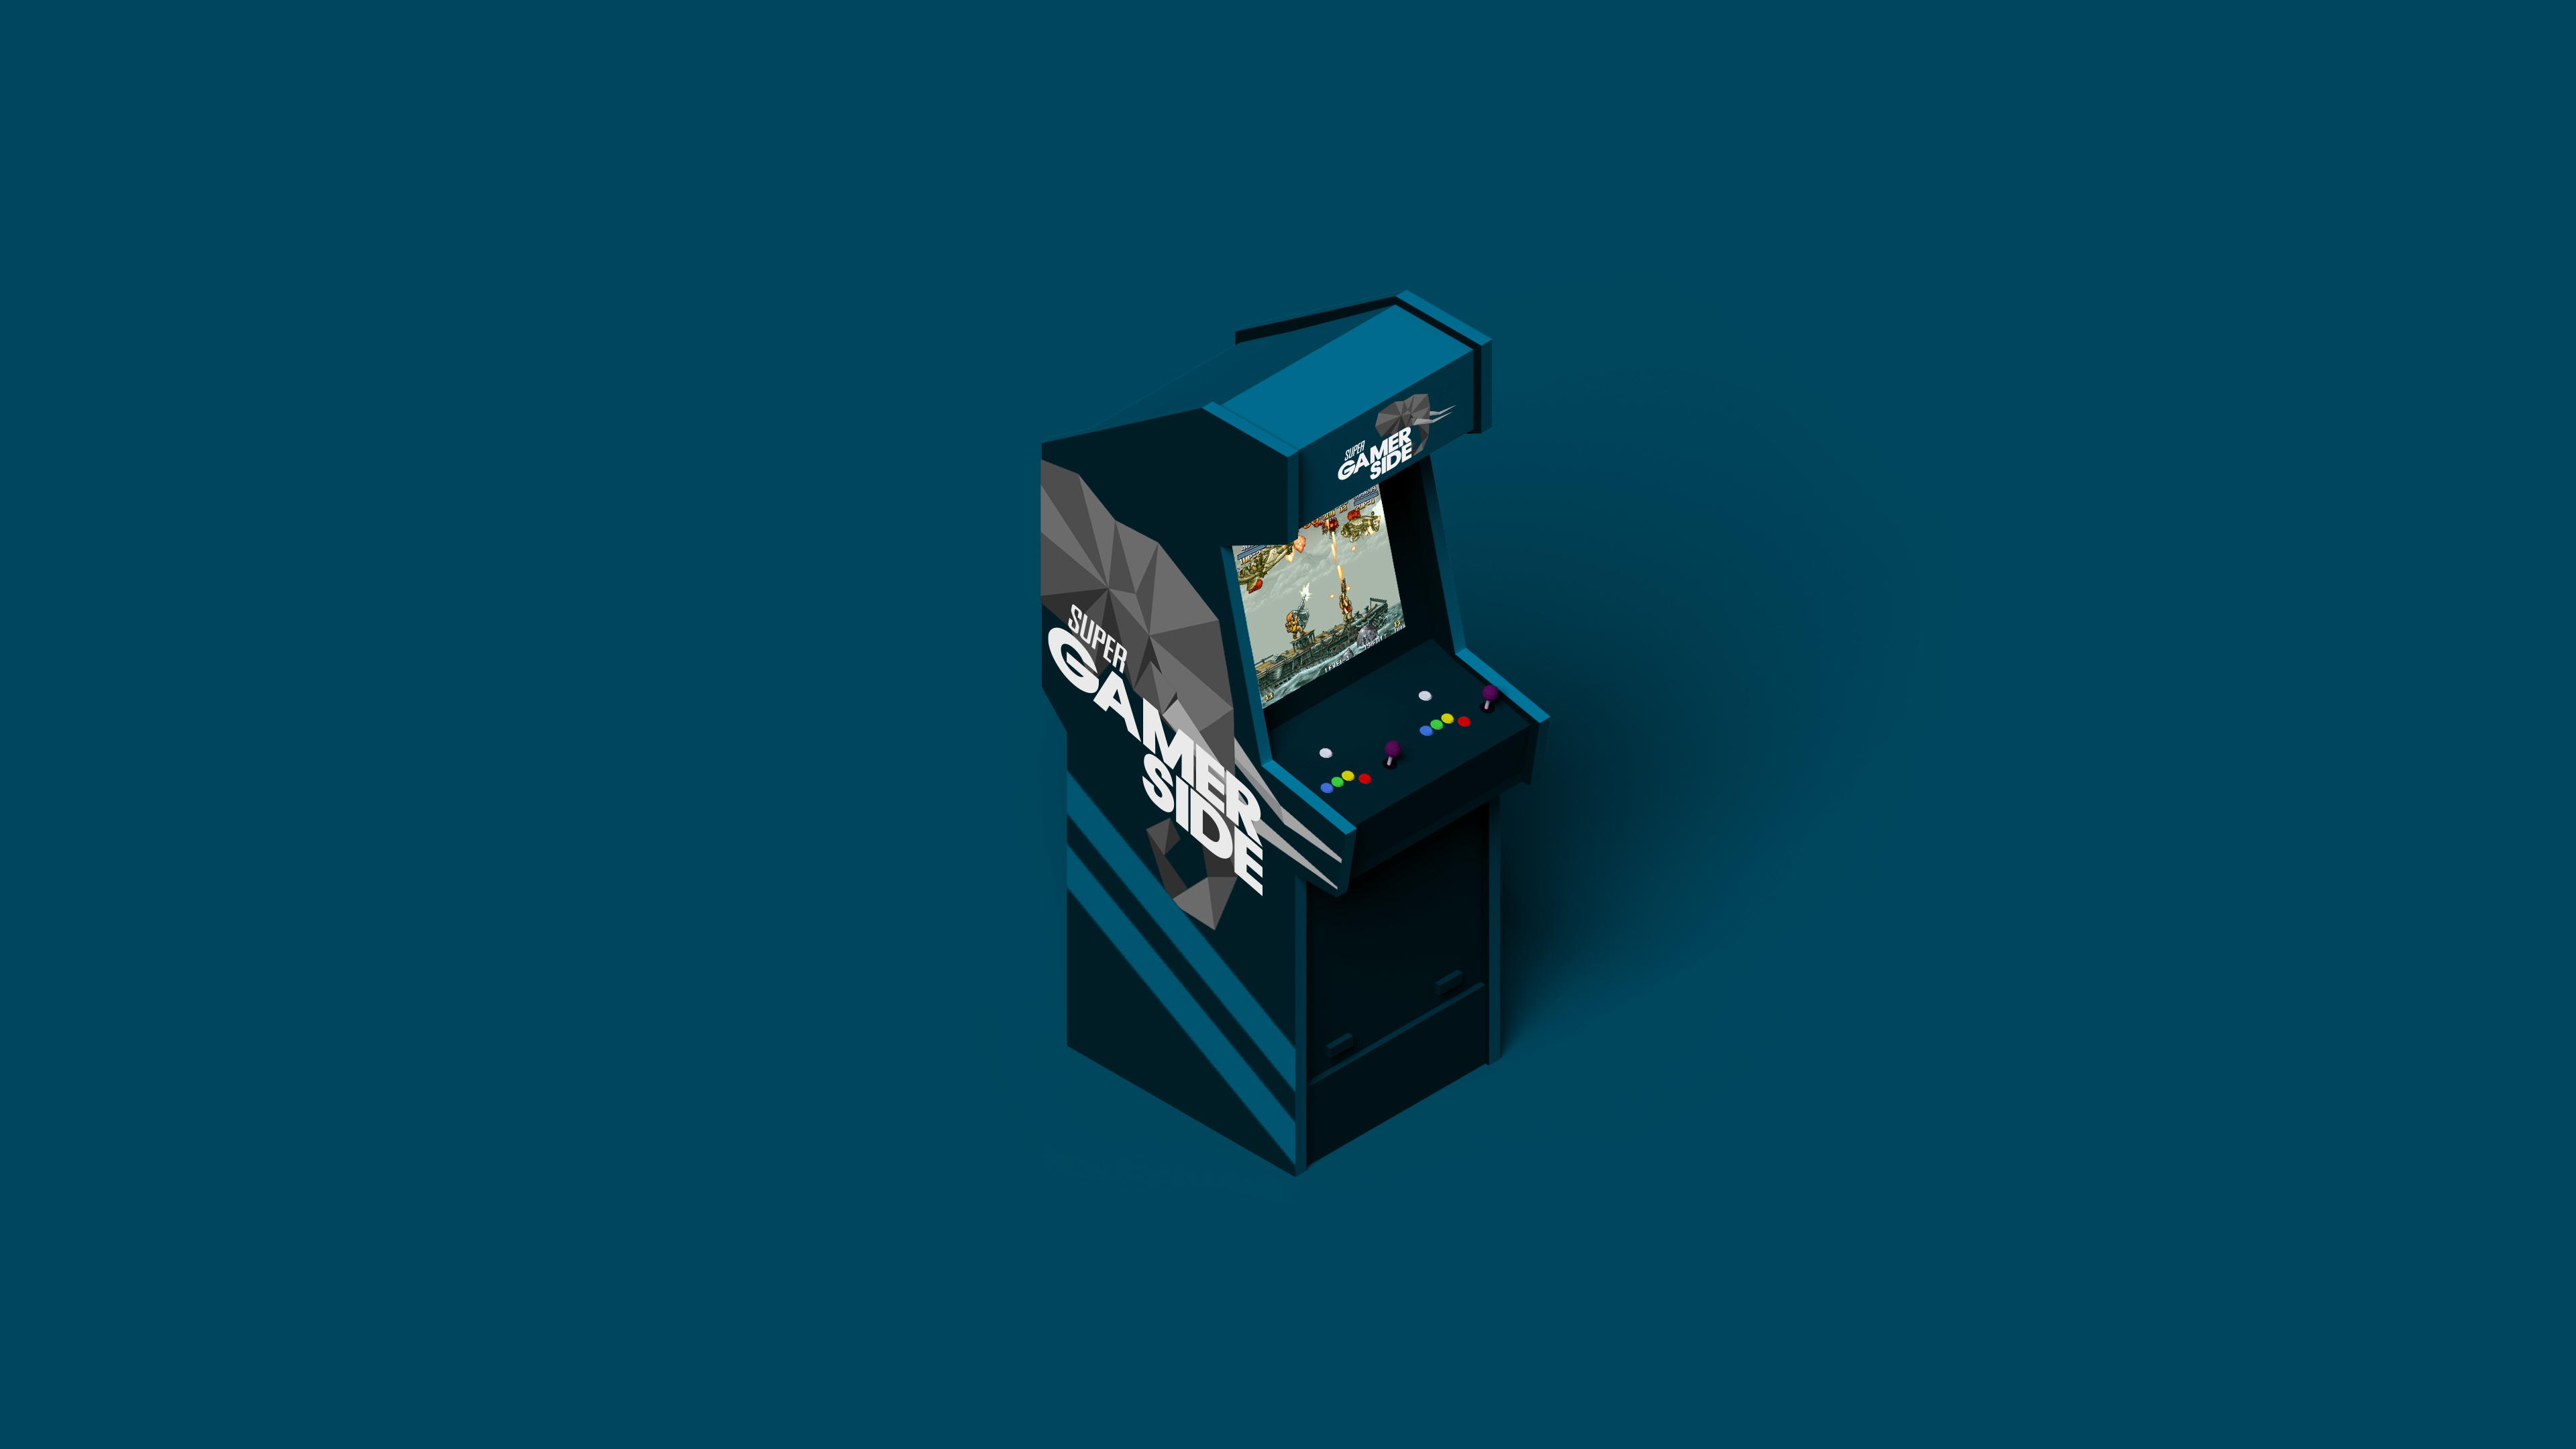 Gamerside Podcast Arcade Cabinet Video Games Low Poly 3840x2160